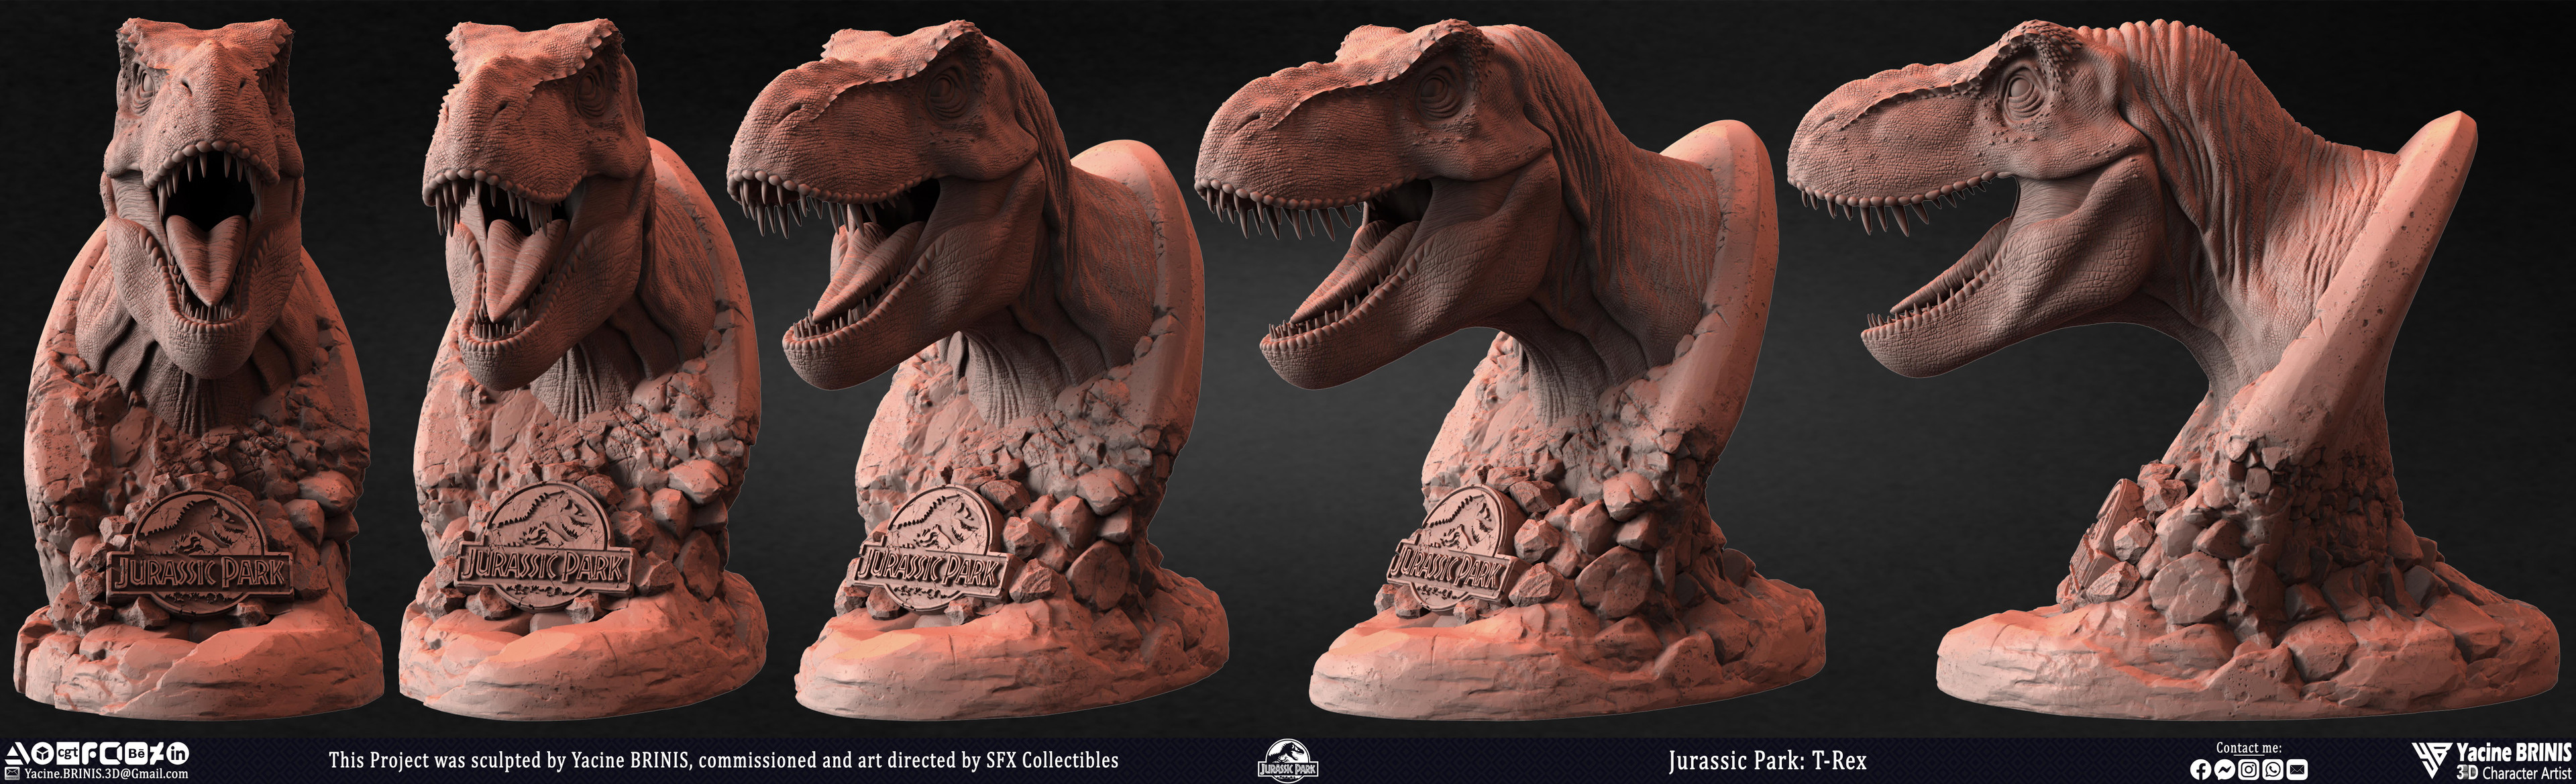 T-Rex Universal Pictures sculpted by Yacine BRINIS 014